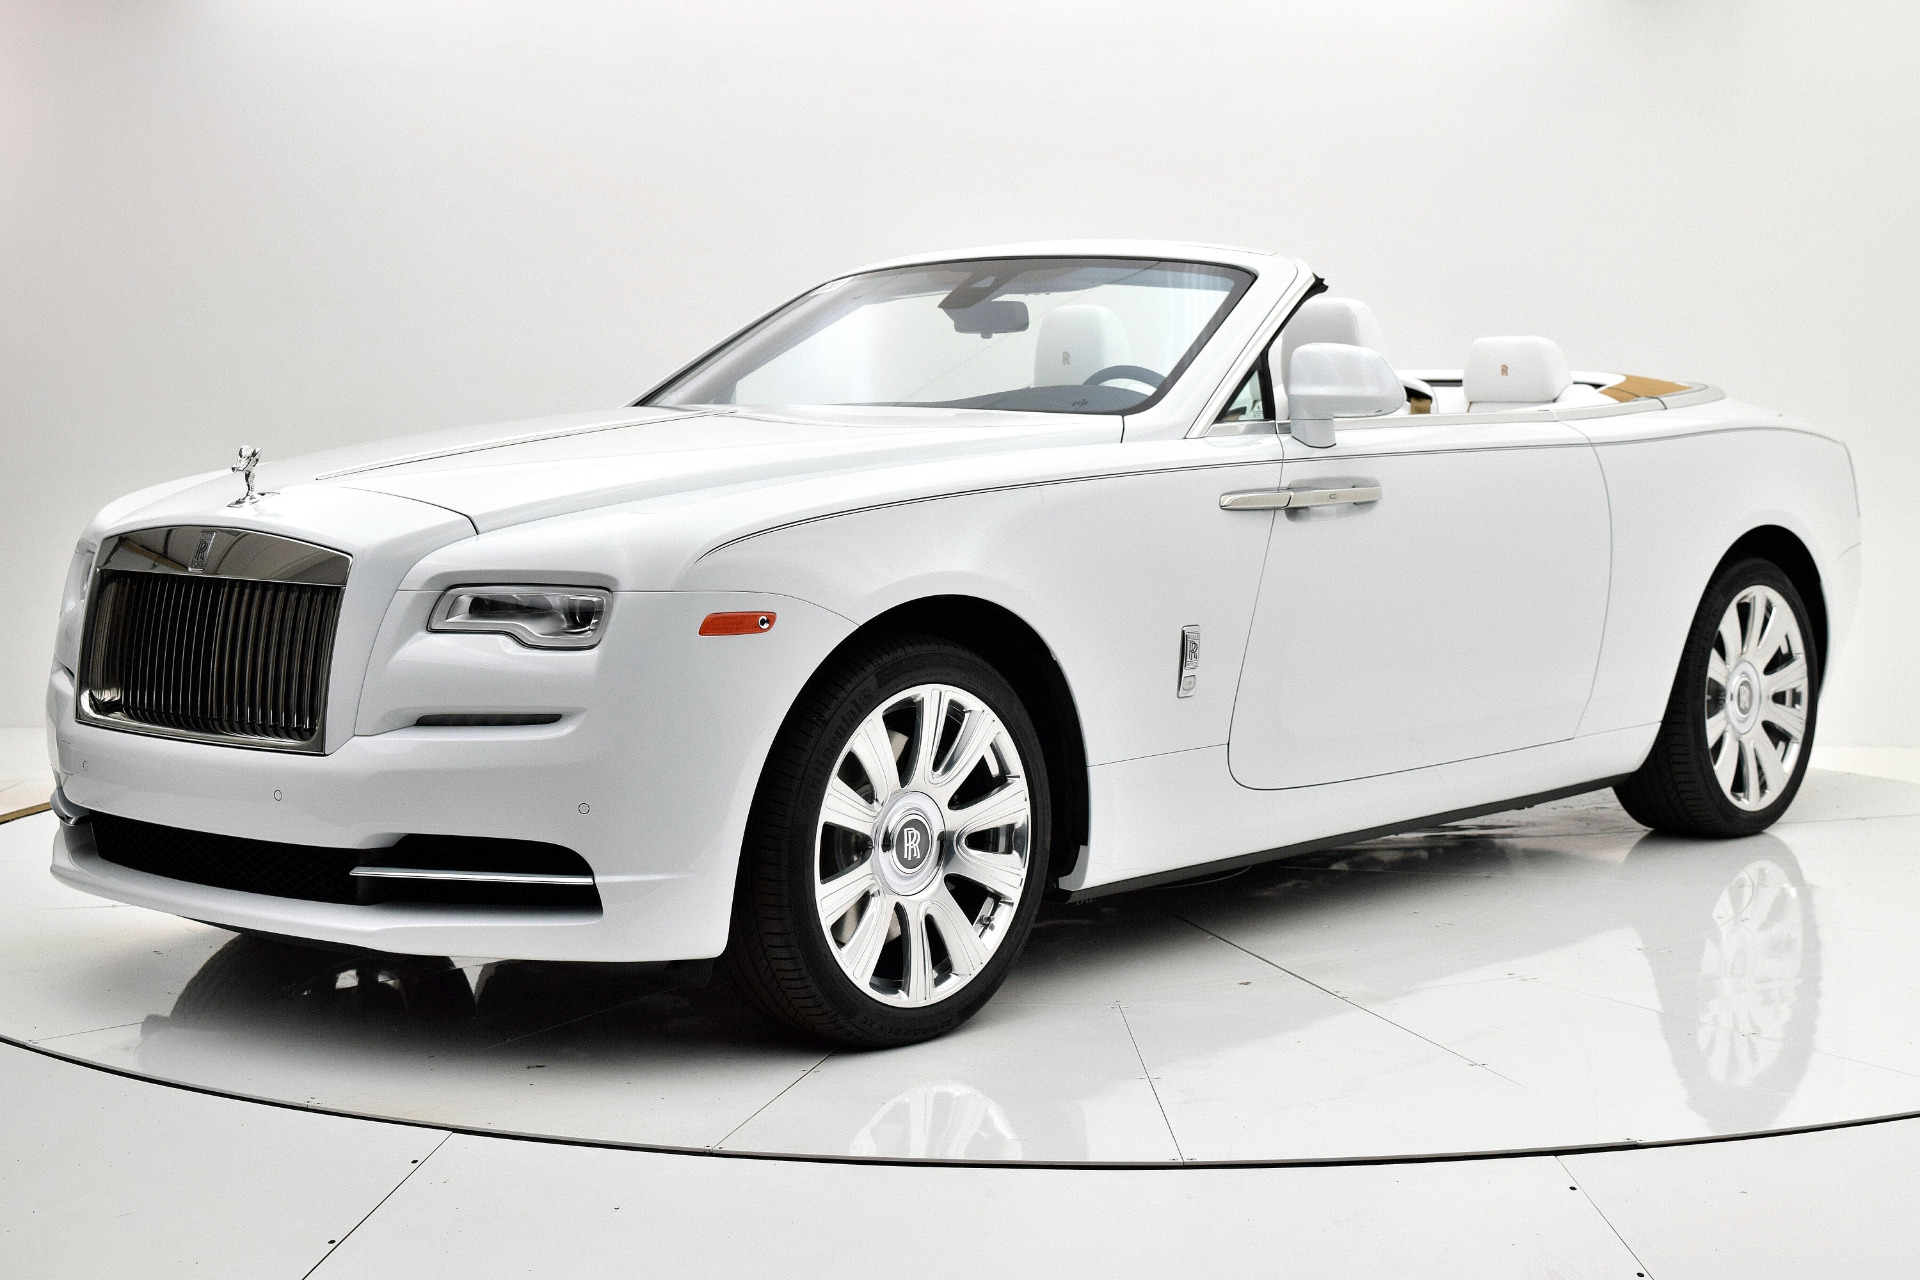 Used RollsRoyce Dawn Convertible 2016  2023 interior  Parkers